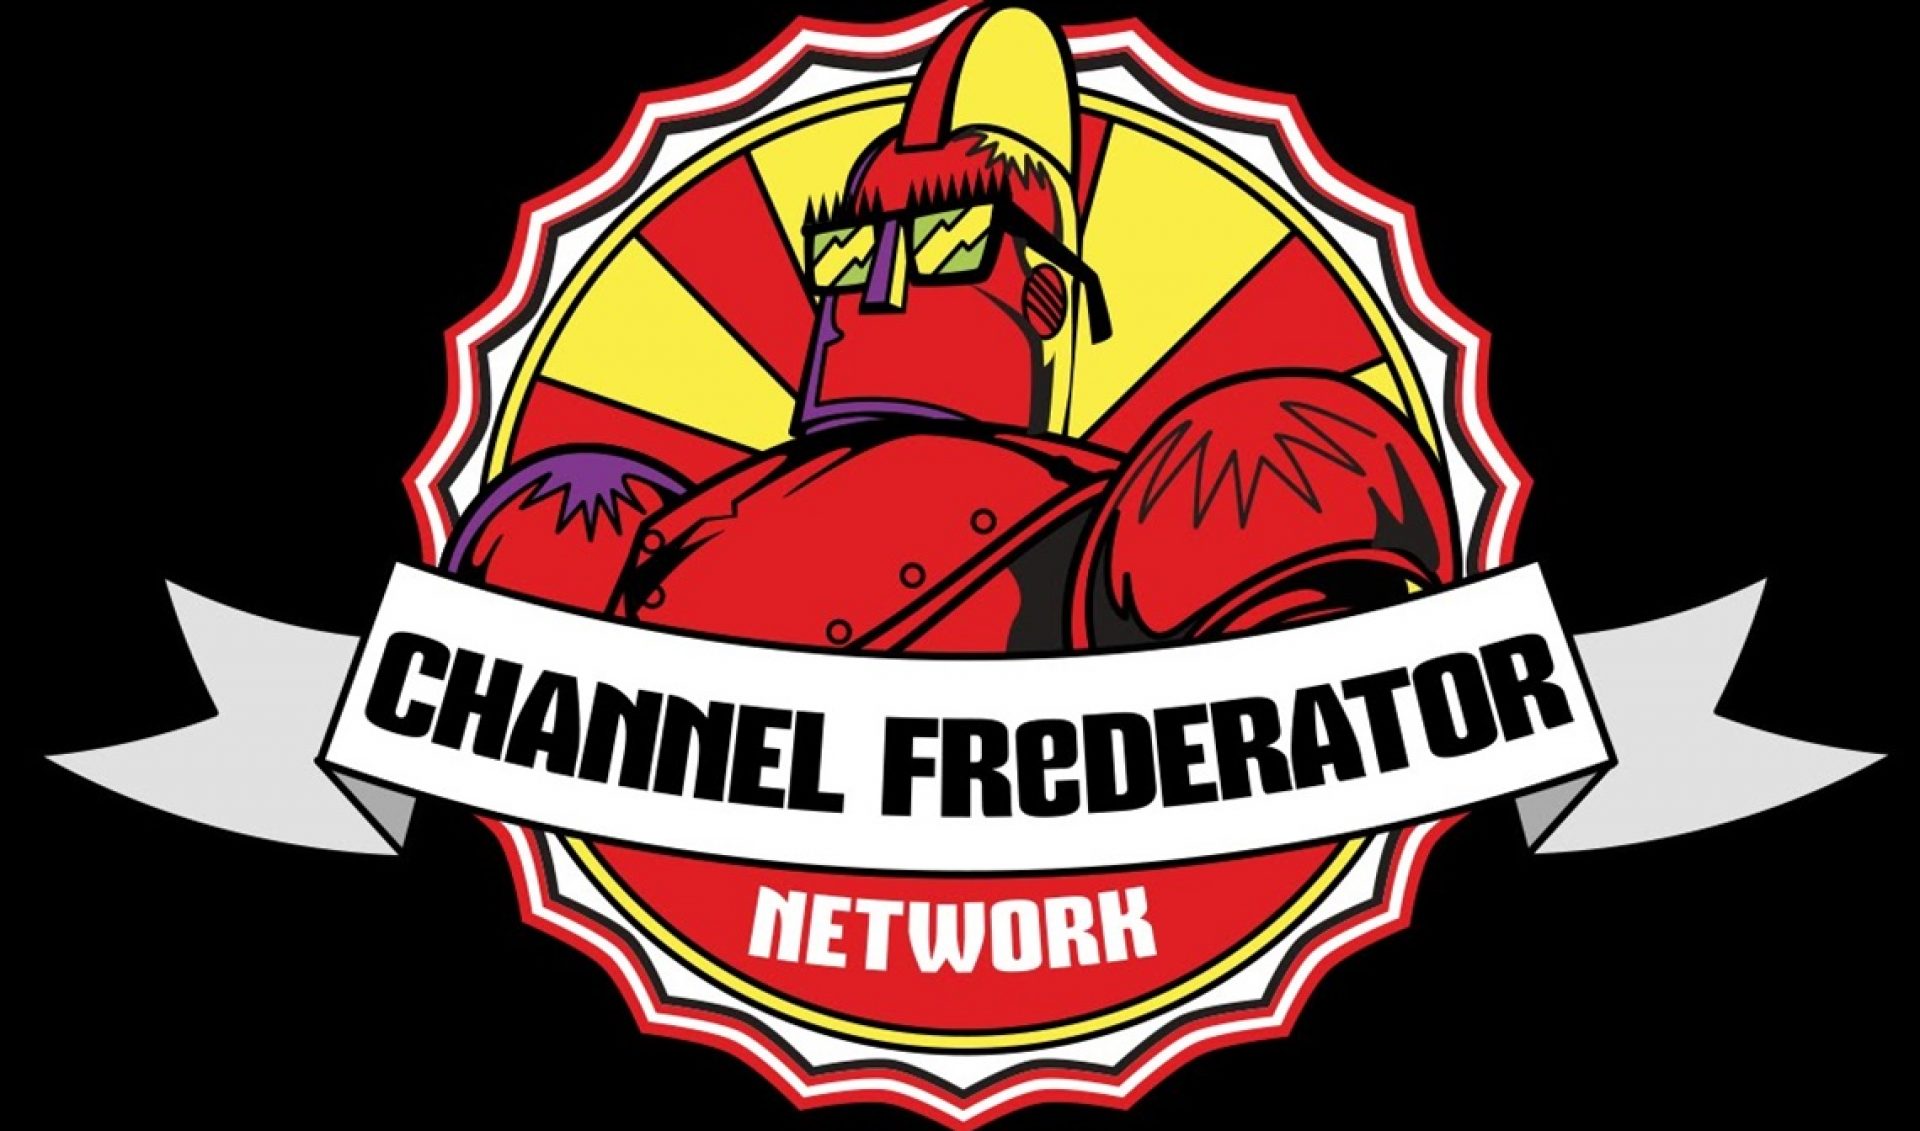 YouTube Millionaires: ChannelFrederator Appeals 